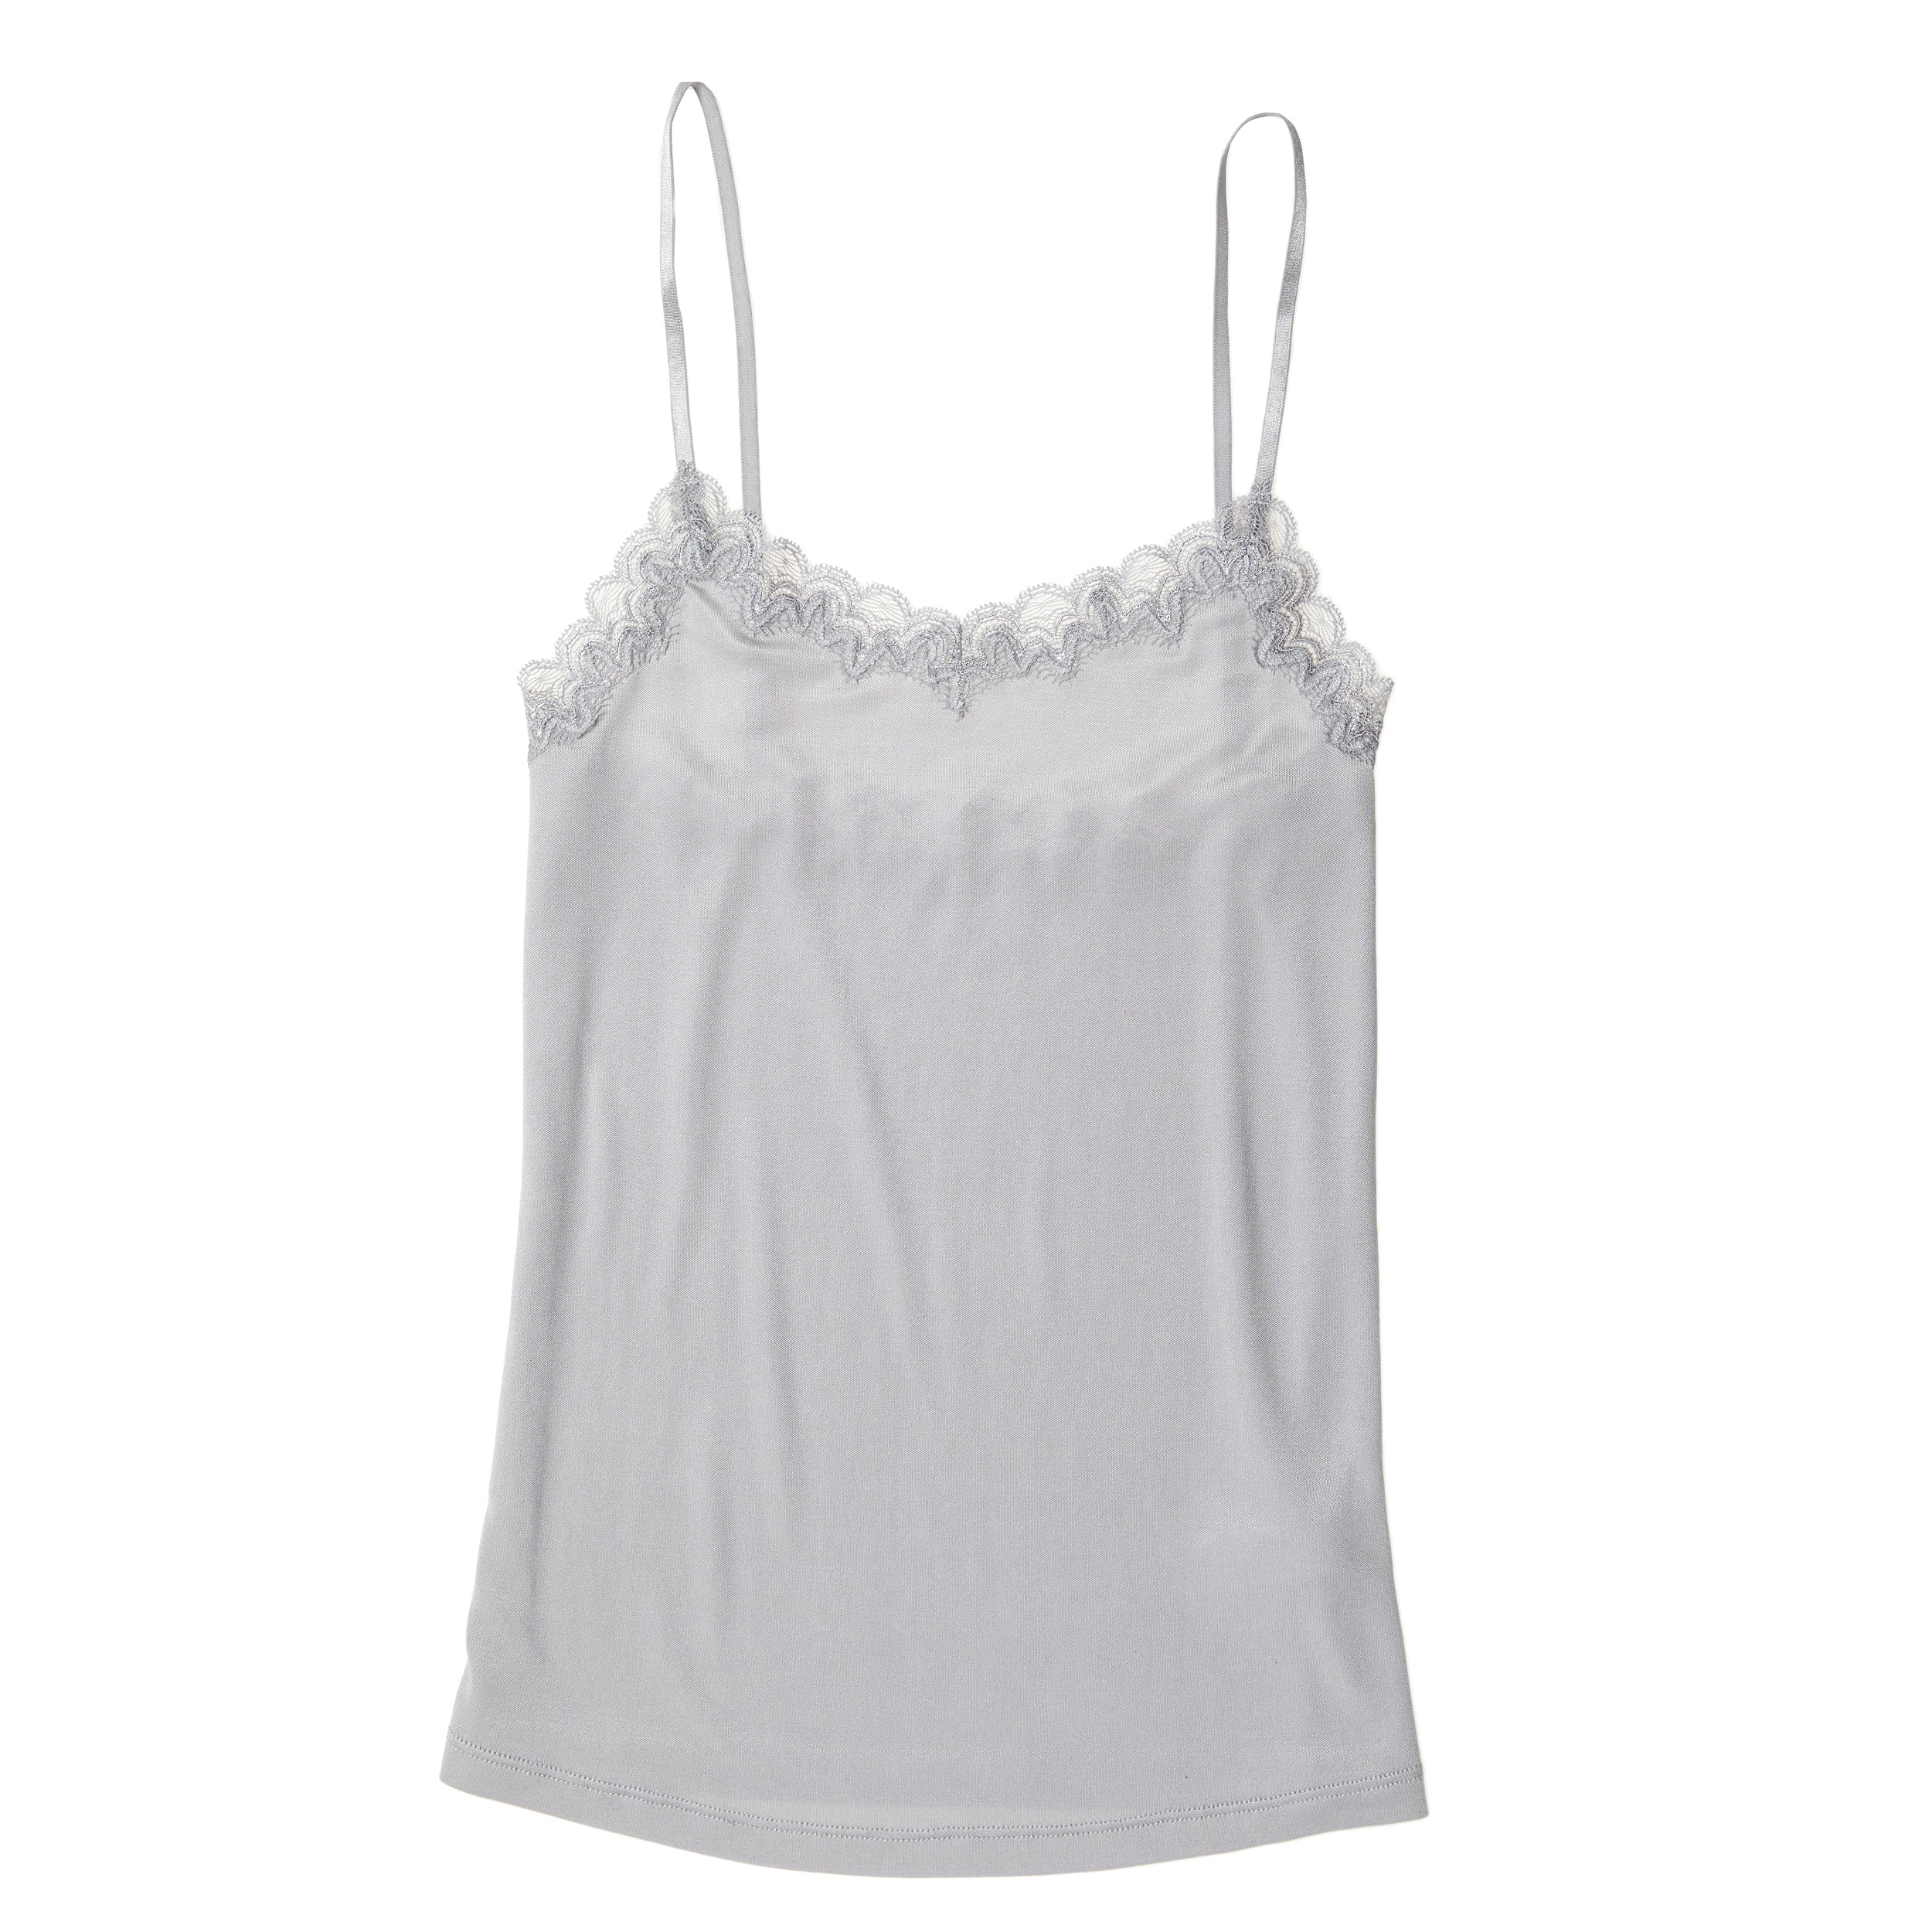 FALCON & BLOOM Cami Clean Grey Silk camisole top with lace